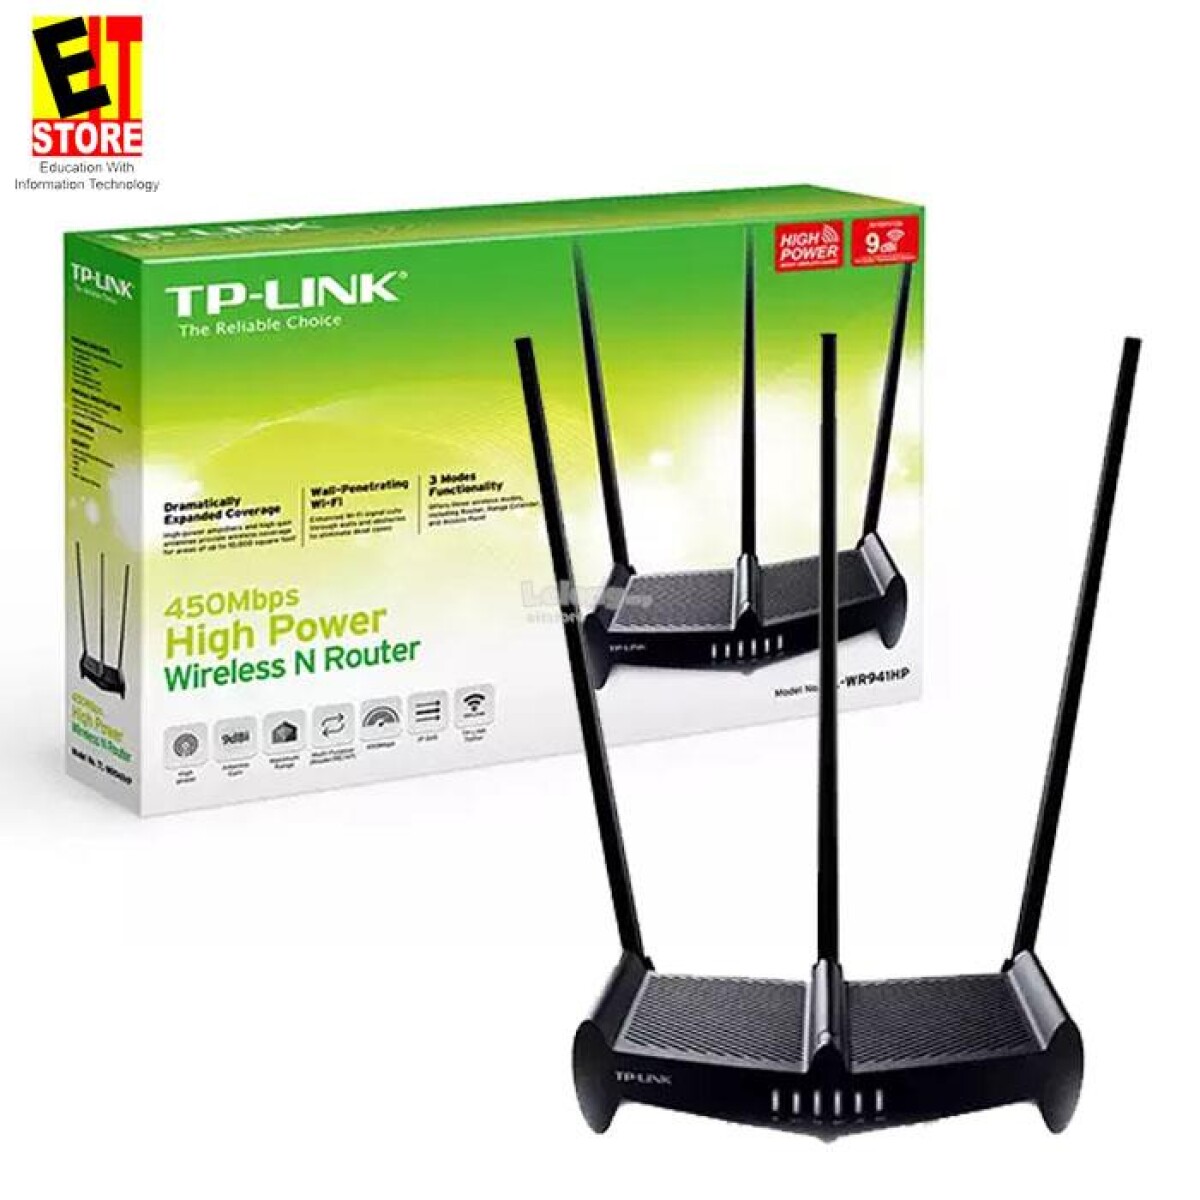 Router Wireless Tp-link Alta Potencia 450MBPS - 001 